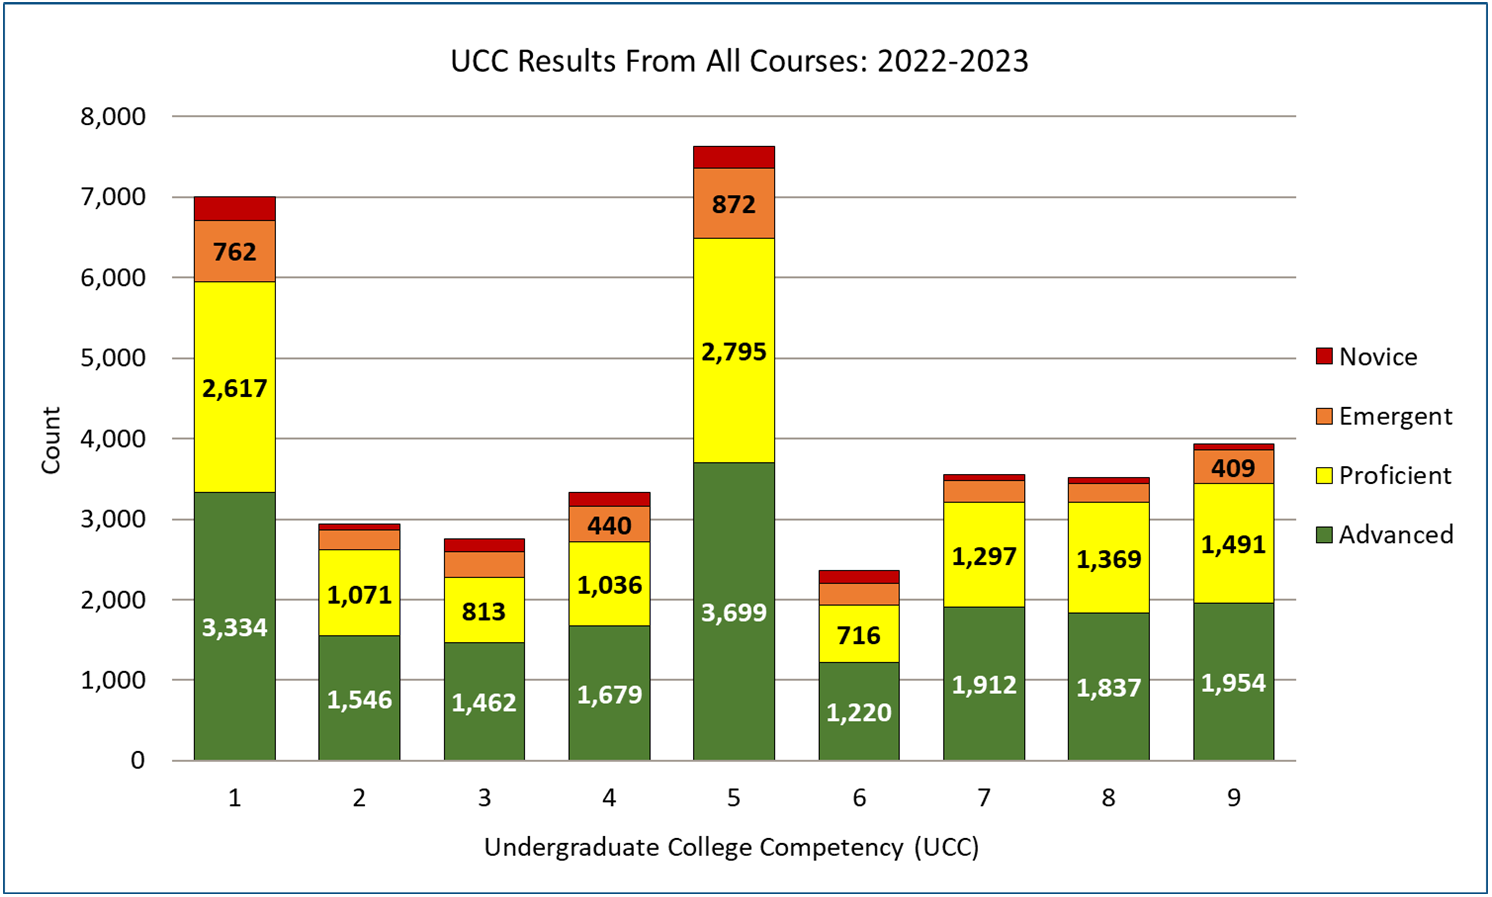 Graph of the number of Undergraduate College Competency (UCC) scores within the Novice, Emergent, Proficient, and Advanced scoring categories. Results are shown for each UCC. Results: 5951 students scored Proficient or Advanced for the Written Communication UCC. 2617 students scored Proficient or Advanced for the Oral Communication UCC. 2275 students scored Proficient or Advanced for the Information Literacy UCC. 2715 students scored Proficient or Advanced for the Quantitative Literacy UCC. 6494 students scored Proficient or Advanced for the Critical Reasoning UCC. 1936 students scored Proficient or Advanced for the Technological Skills UCC. 3209 students scored Proficient or Advanced for the Values UCC. 3206 students scored Proficient or Advanced for the Ethics UCC. 3445 students scored Proficient or Advanced for the Diversity and Global Awareness UCC.